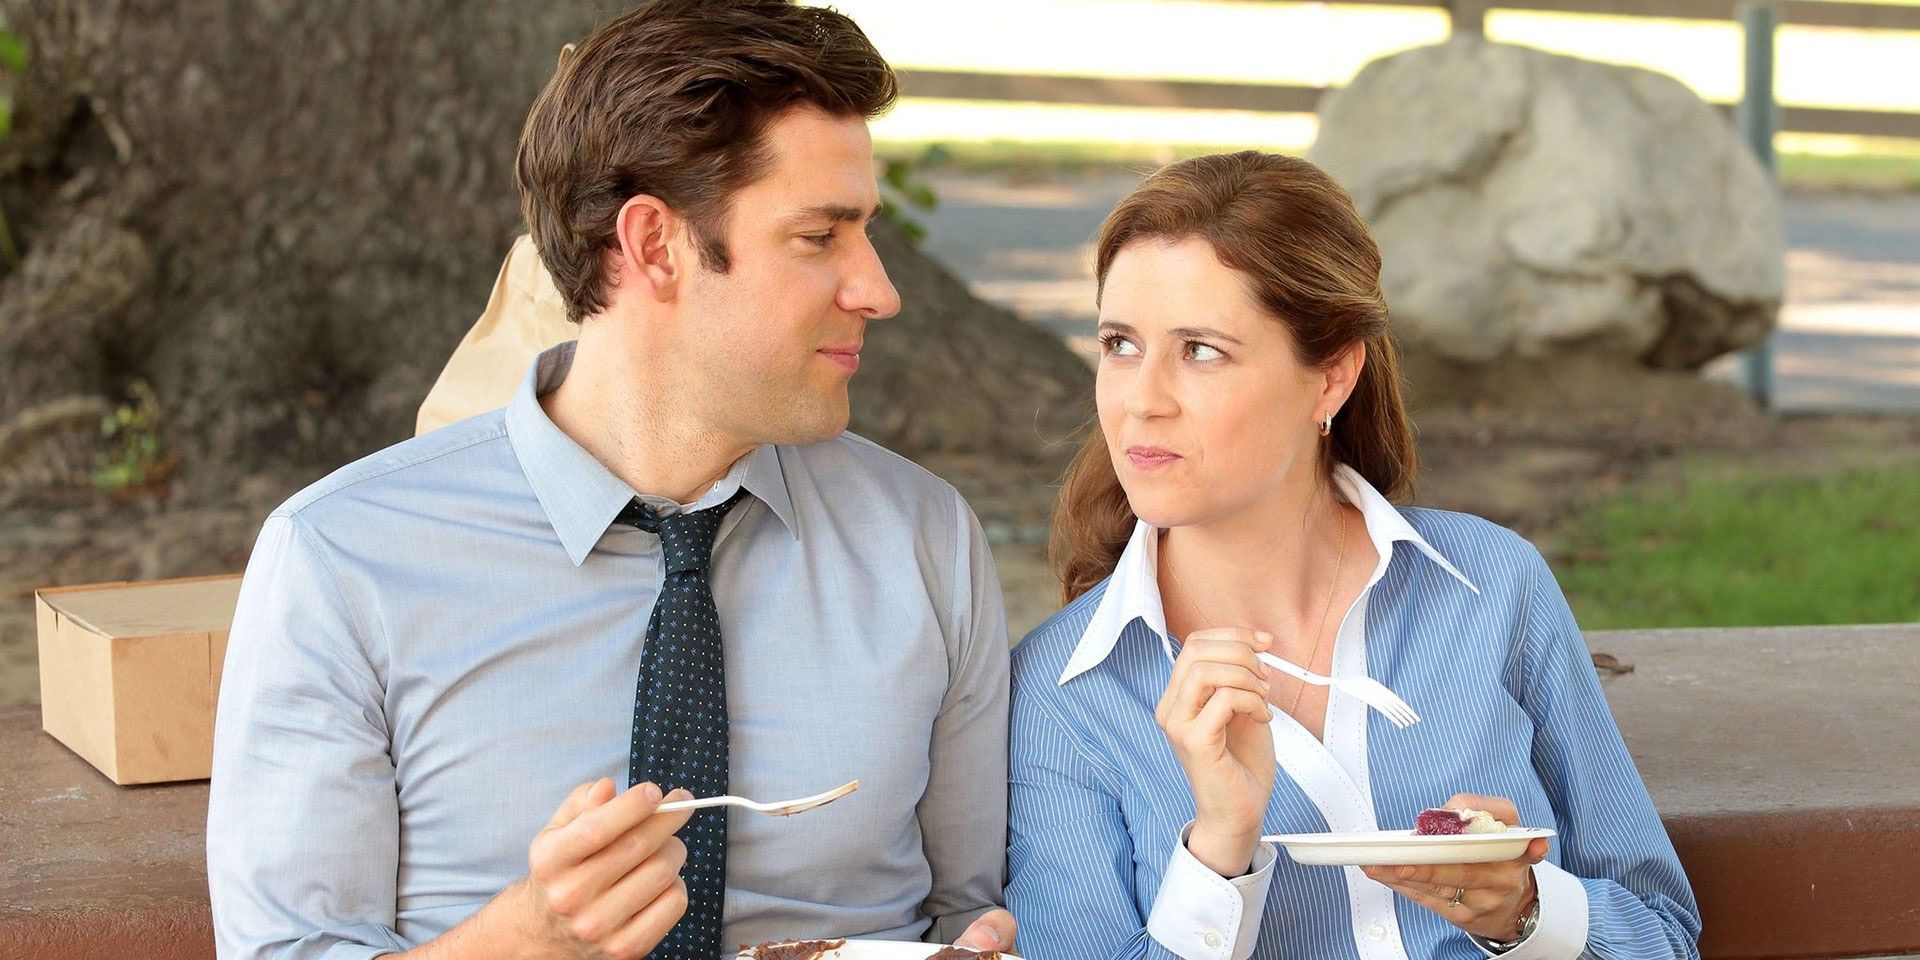 Jim and Pam looking at each other in The Office while eating from disposable plates